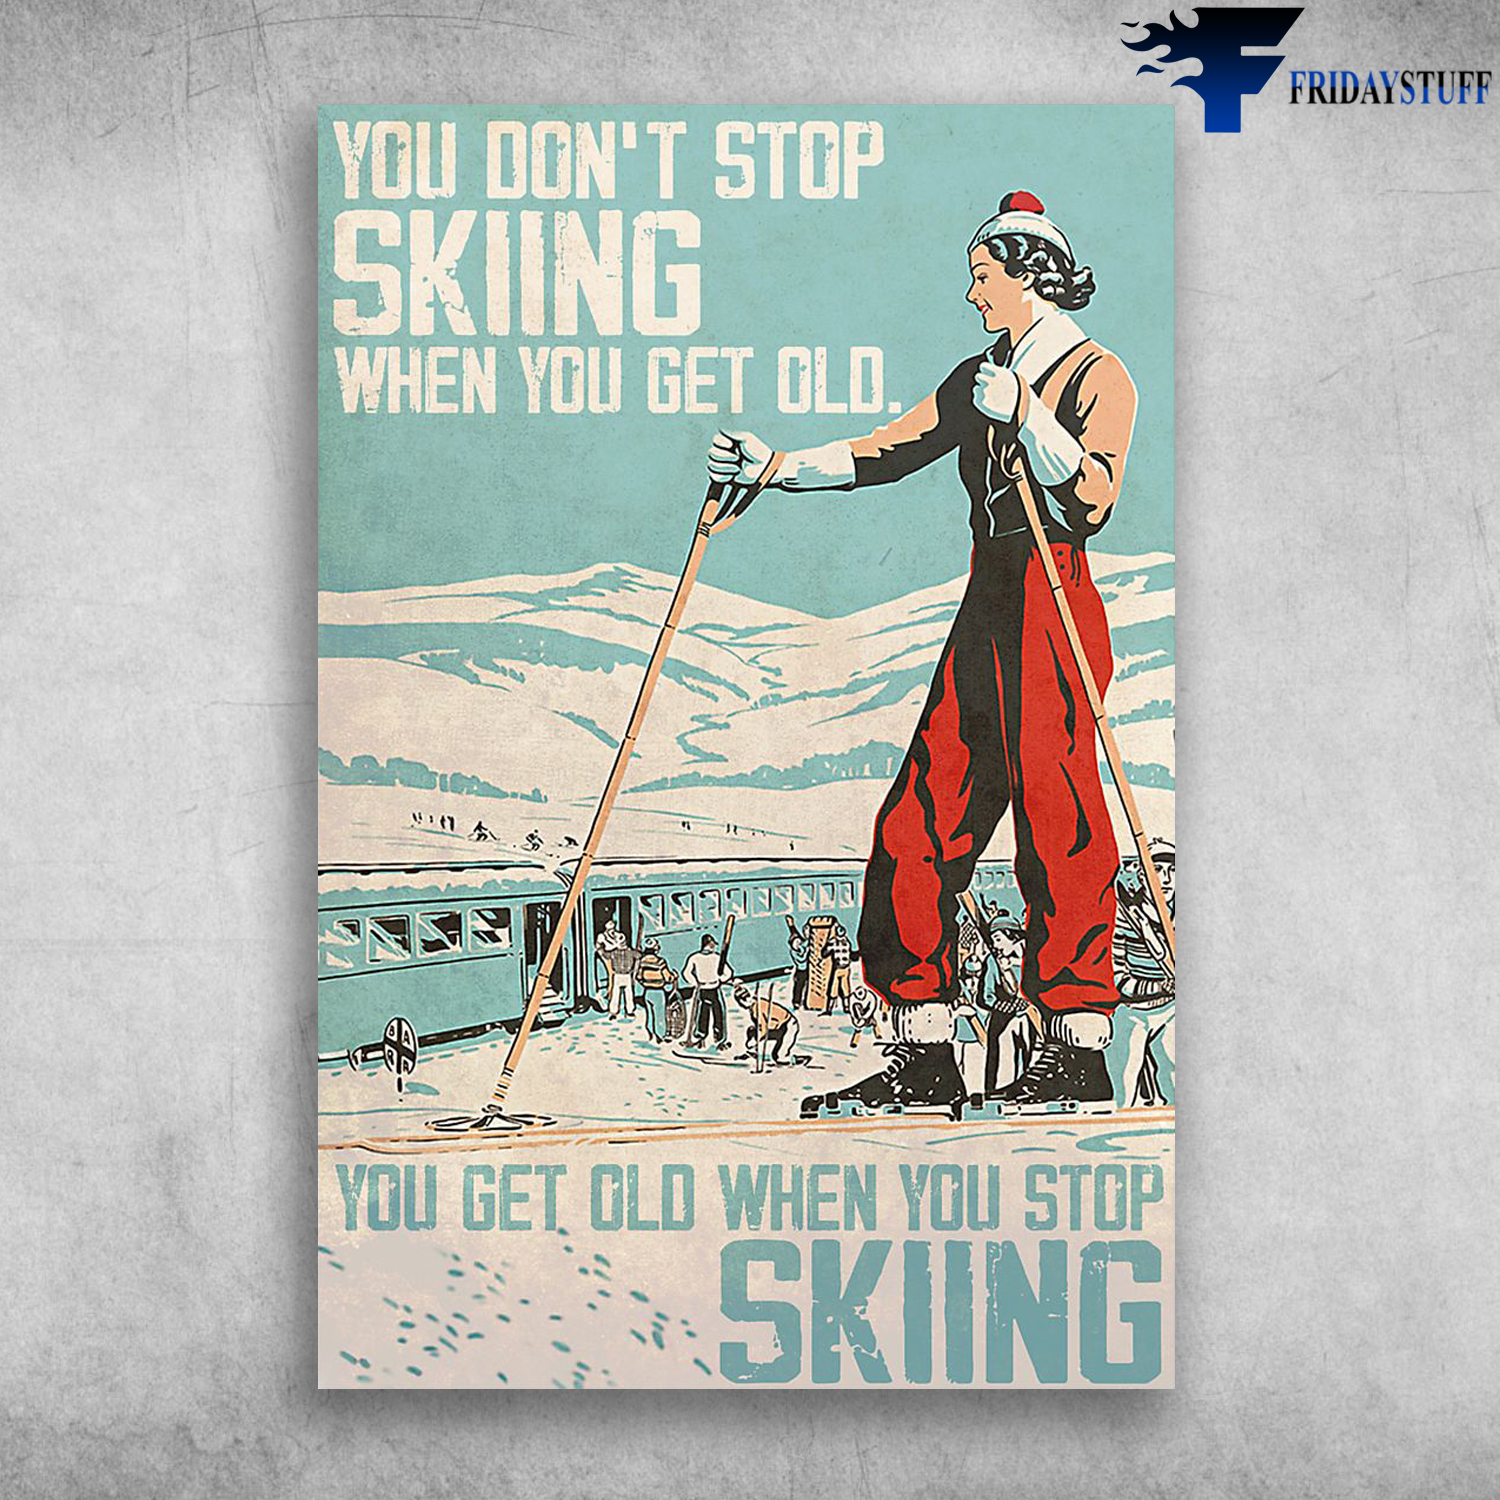 You Don't Stop Skiing When You Get Old - Girl Skiing